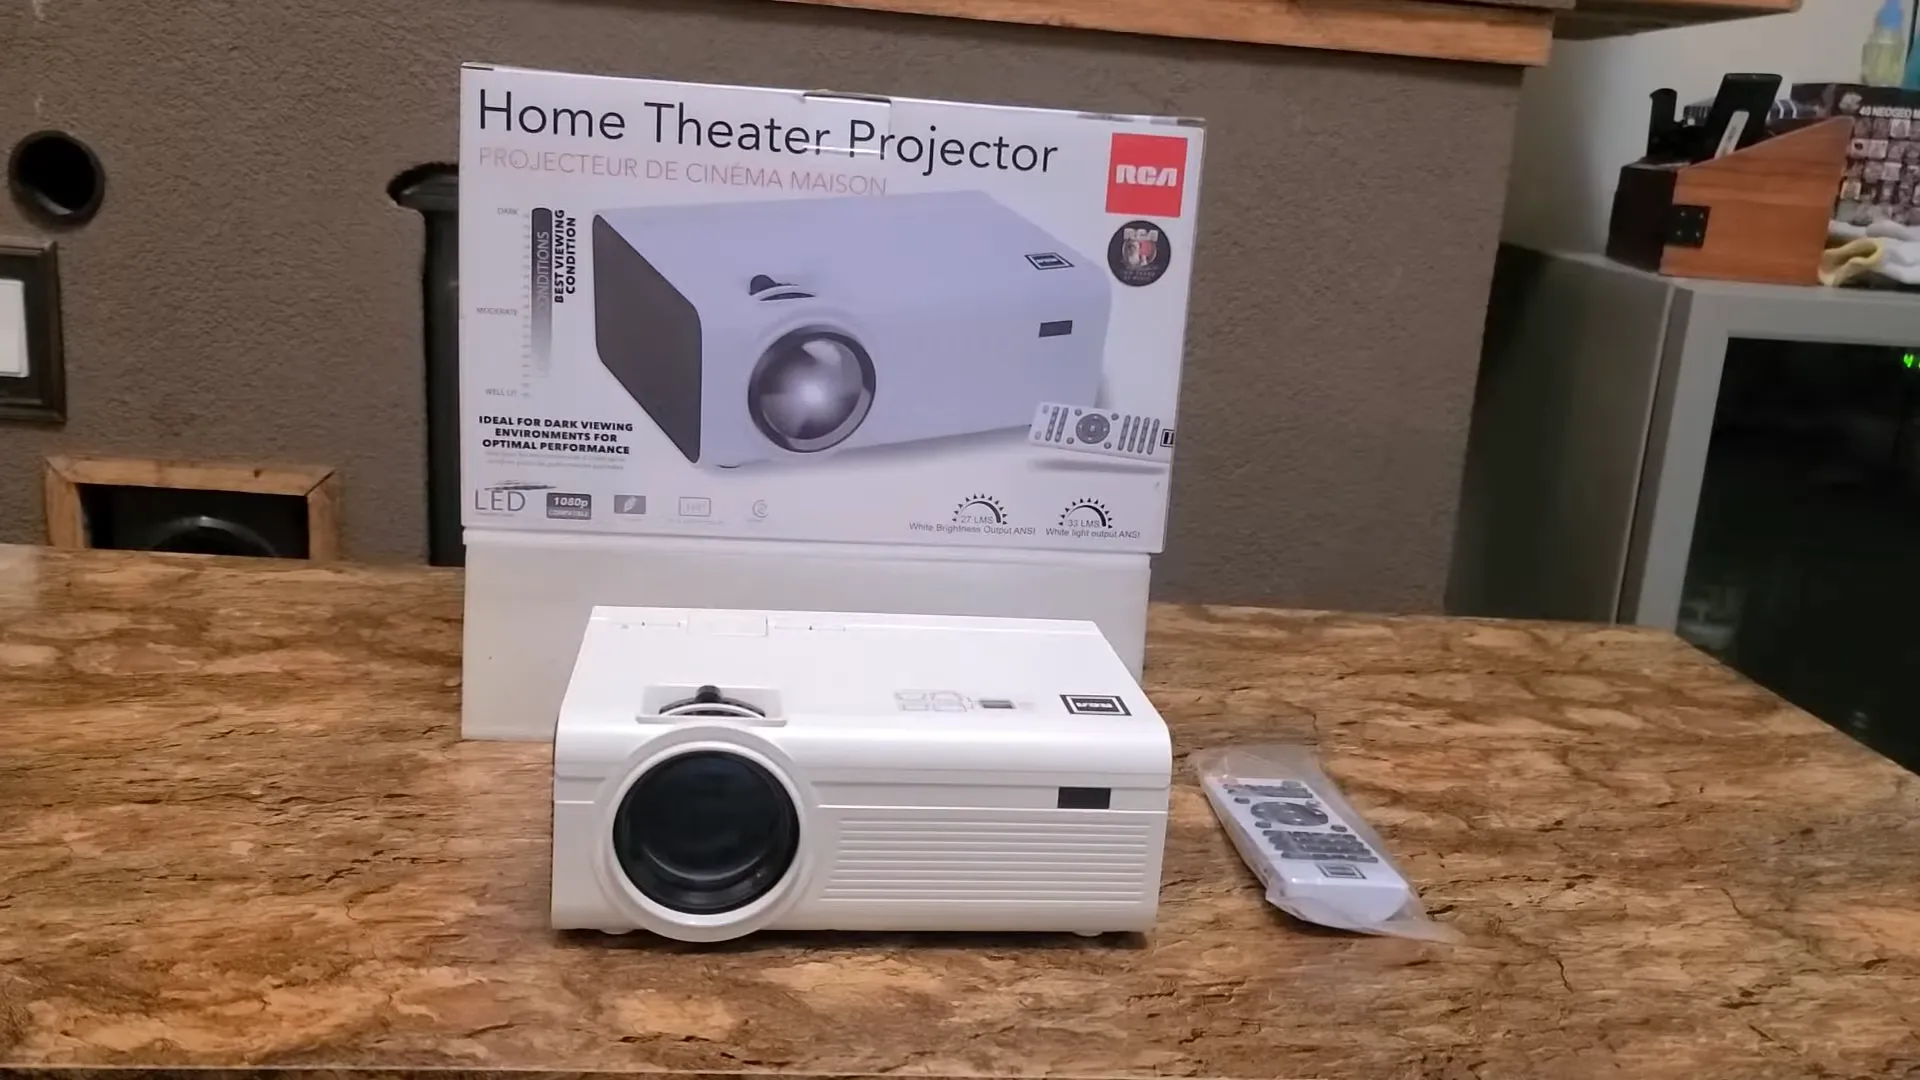 RCA Home Theater Projector